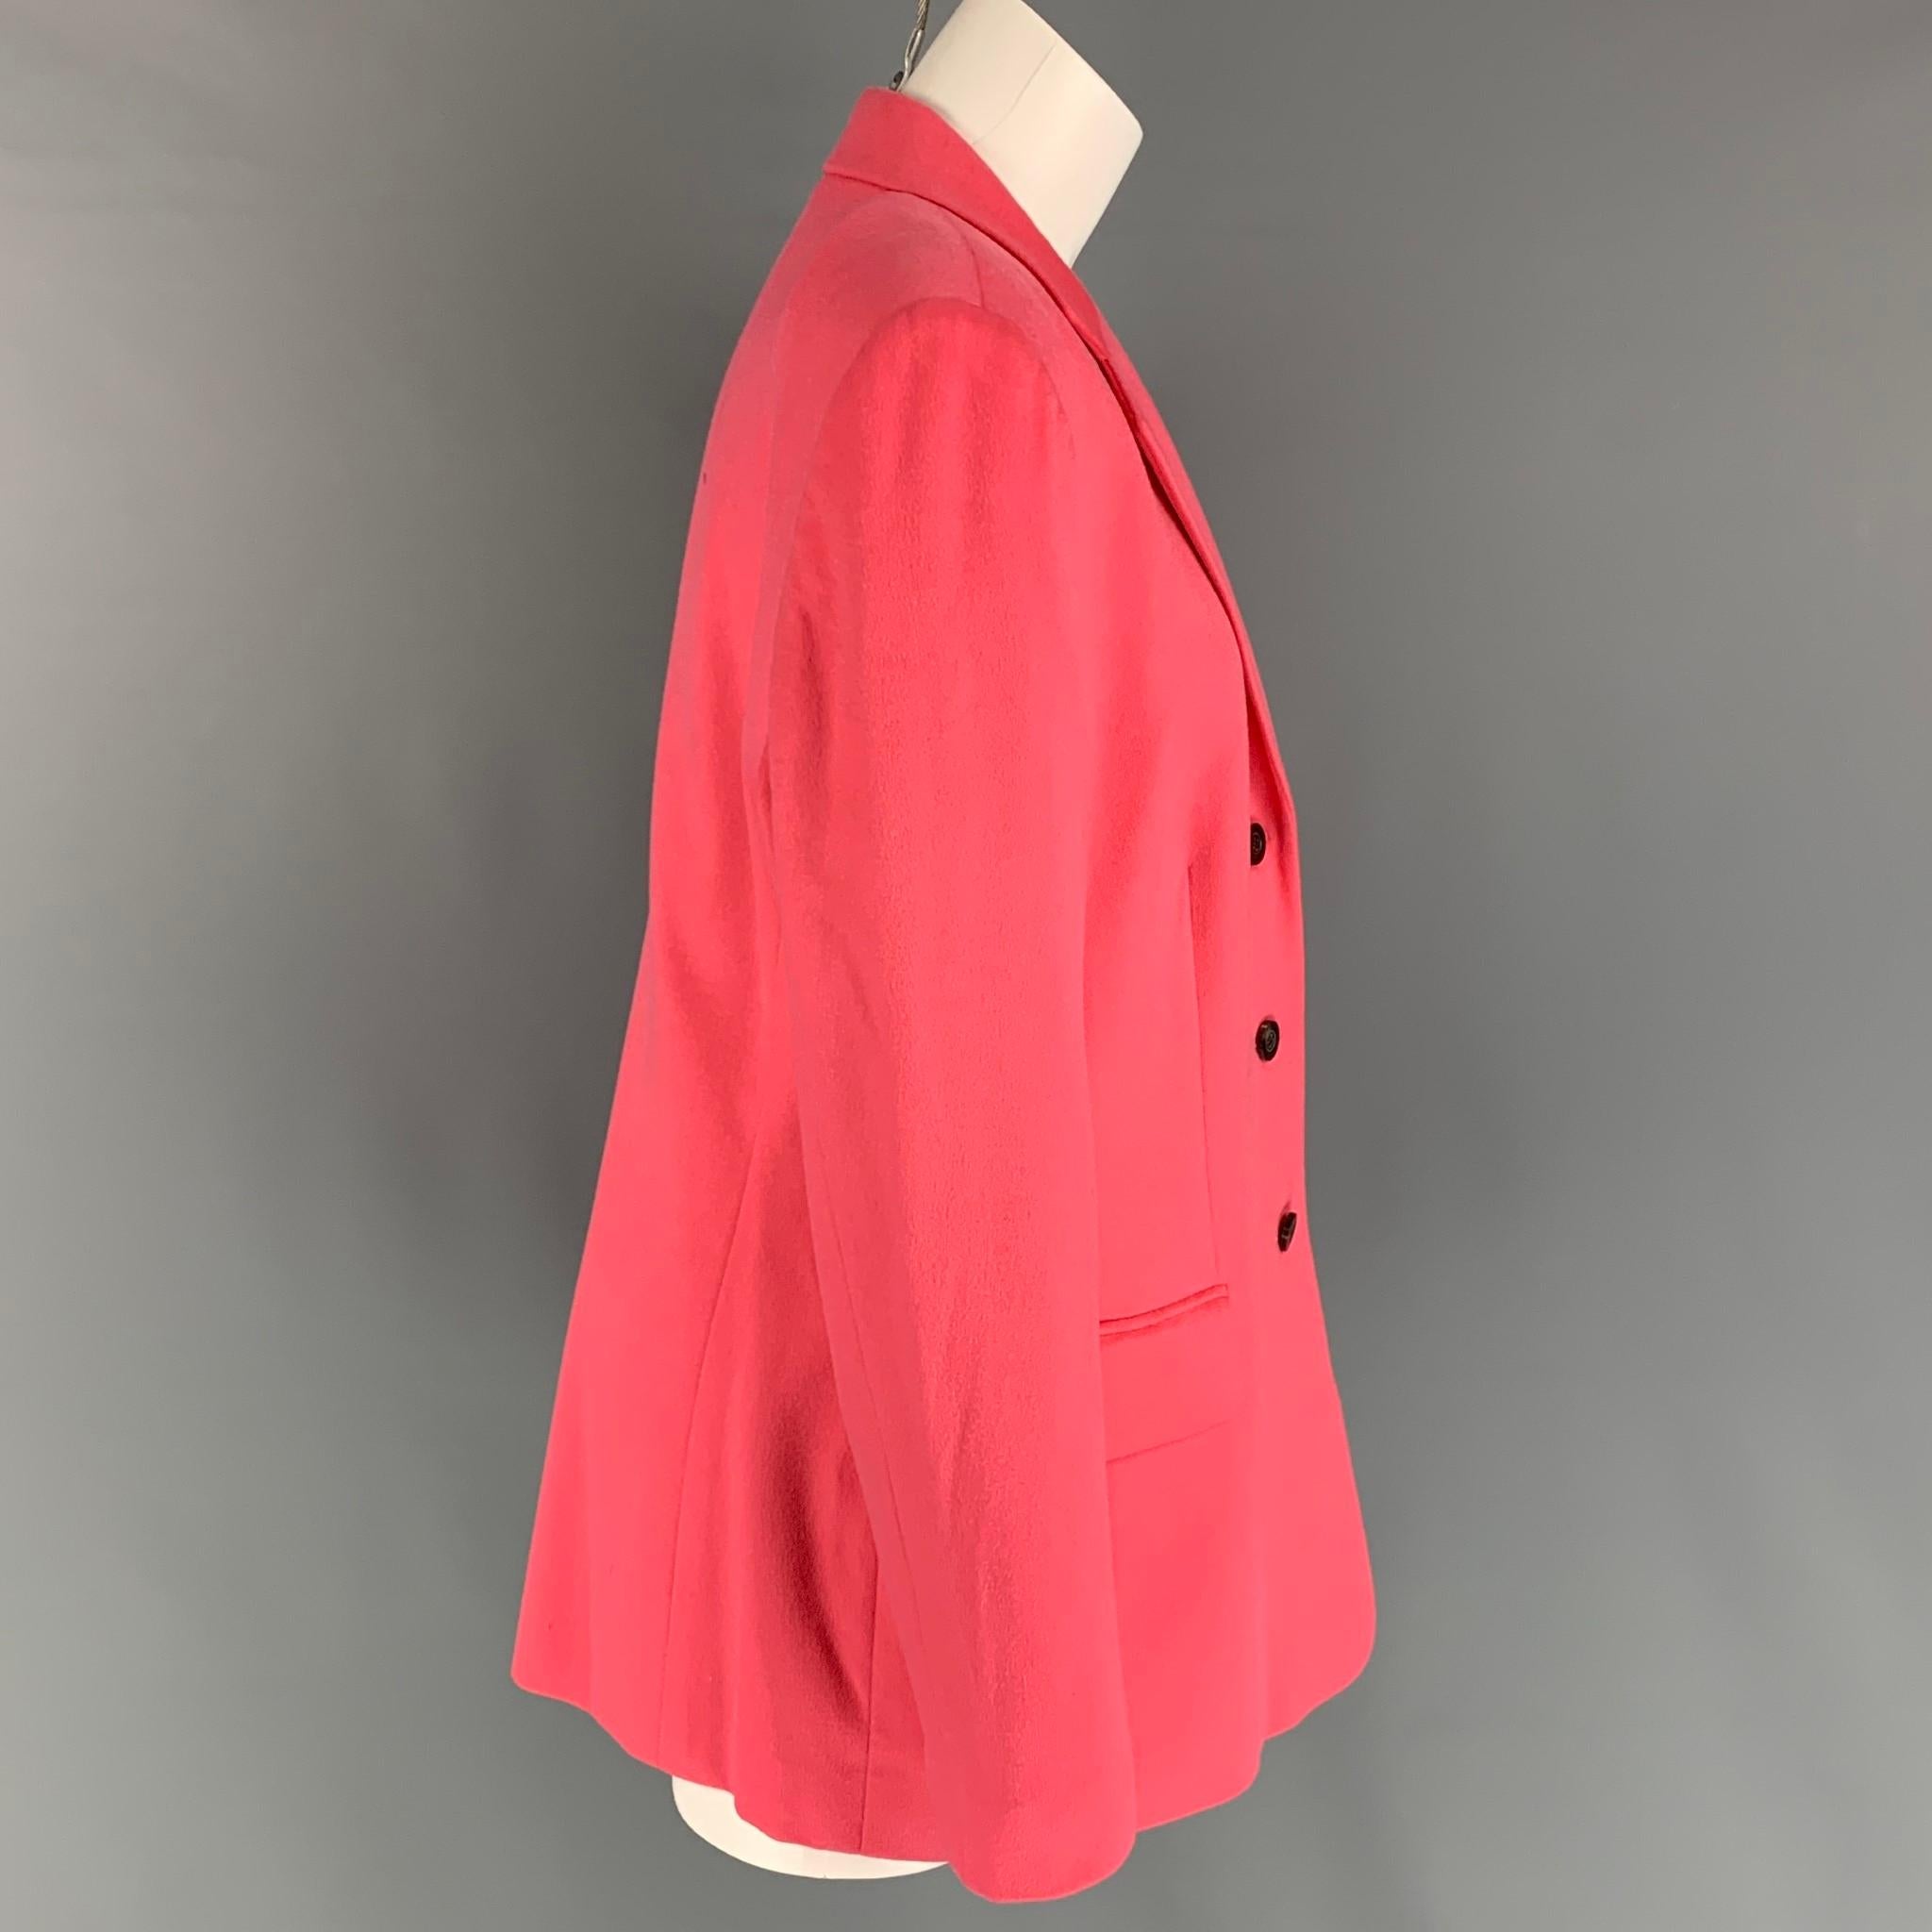 FERAUD blazer comes in a pink cashmere with a full liner featuring a notch lapel, flap pockets, and a three button closure. 

Very Good Pre-Owned Condition.
Marked: D 44 / I 50 / F 46

Measurements:

Shoulder: 18 in.
Bust: 38 in.
Sleeve: 25